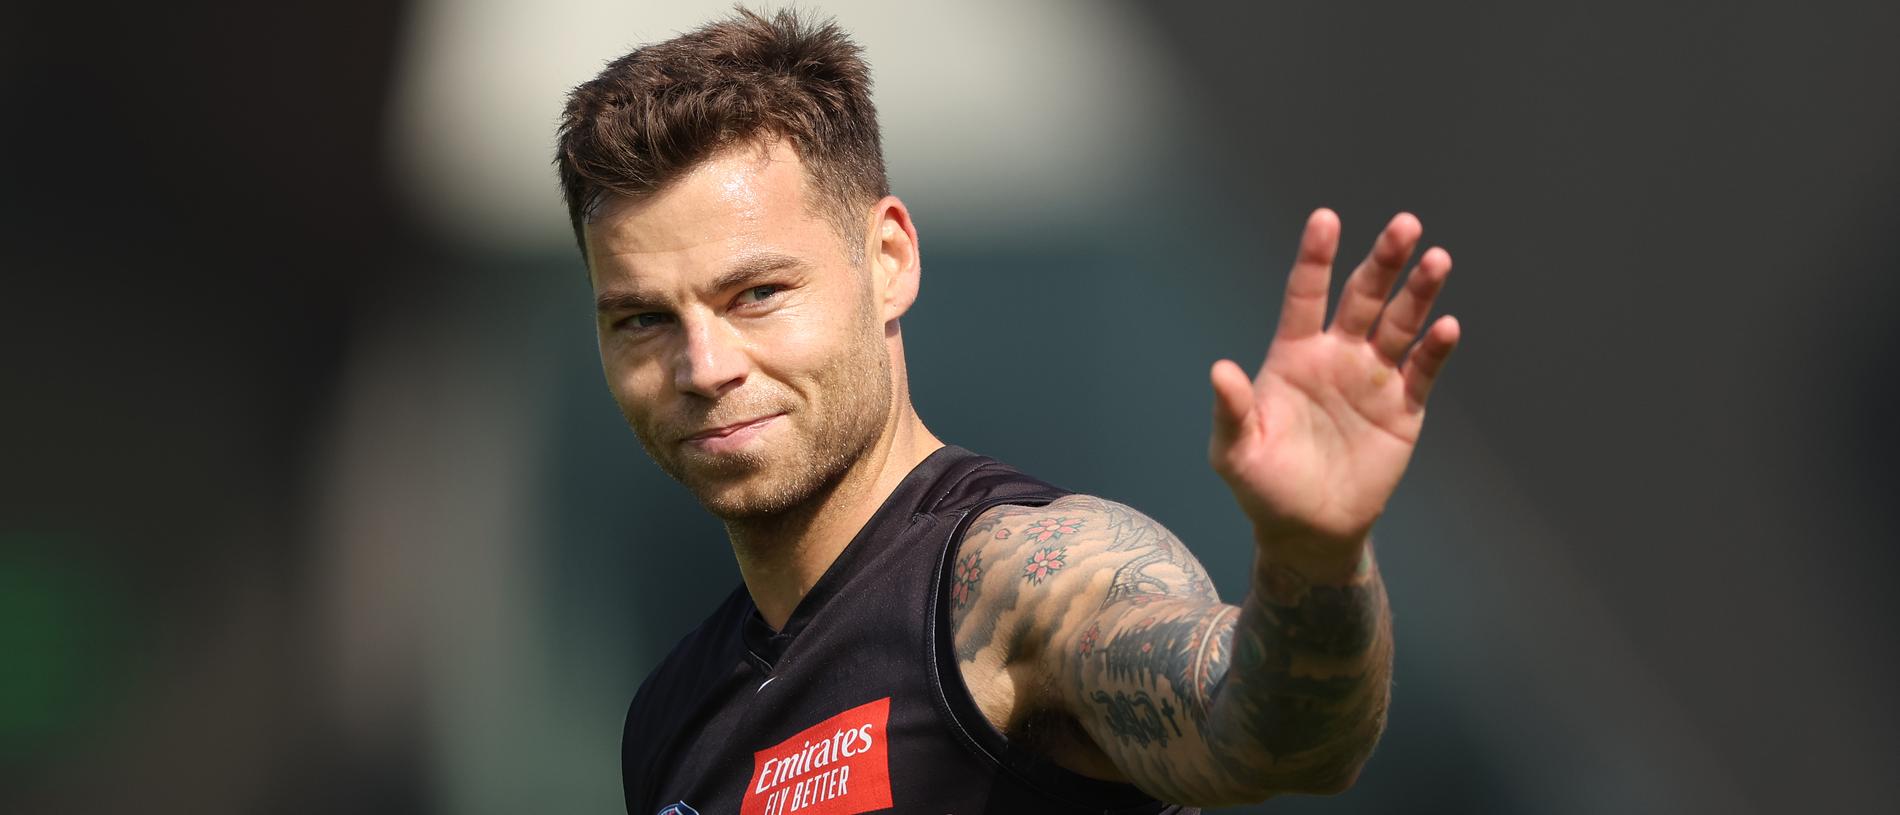 MELBOURNE, AUSTRALIA - SEPTEMBER 28: Jamie Elliott of the Magpies waves to the crowd during a Collingwood Magpies AFL training session at AIA Centre on September 28, 2023 in Melbourne, Australia. (Photo by Robert Cianflone/Getty Images)